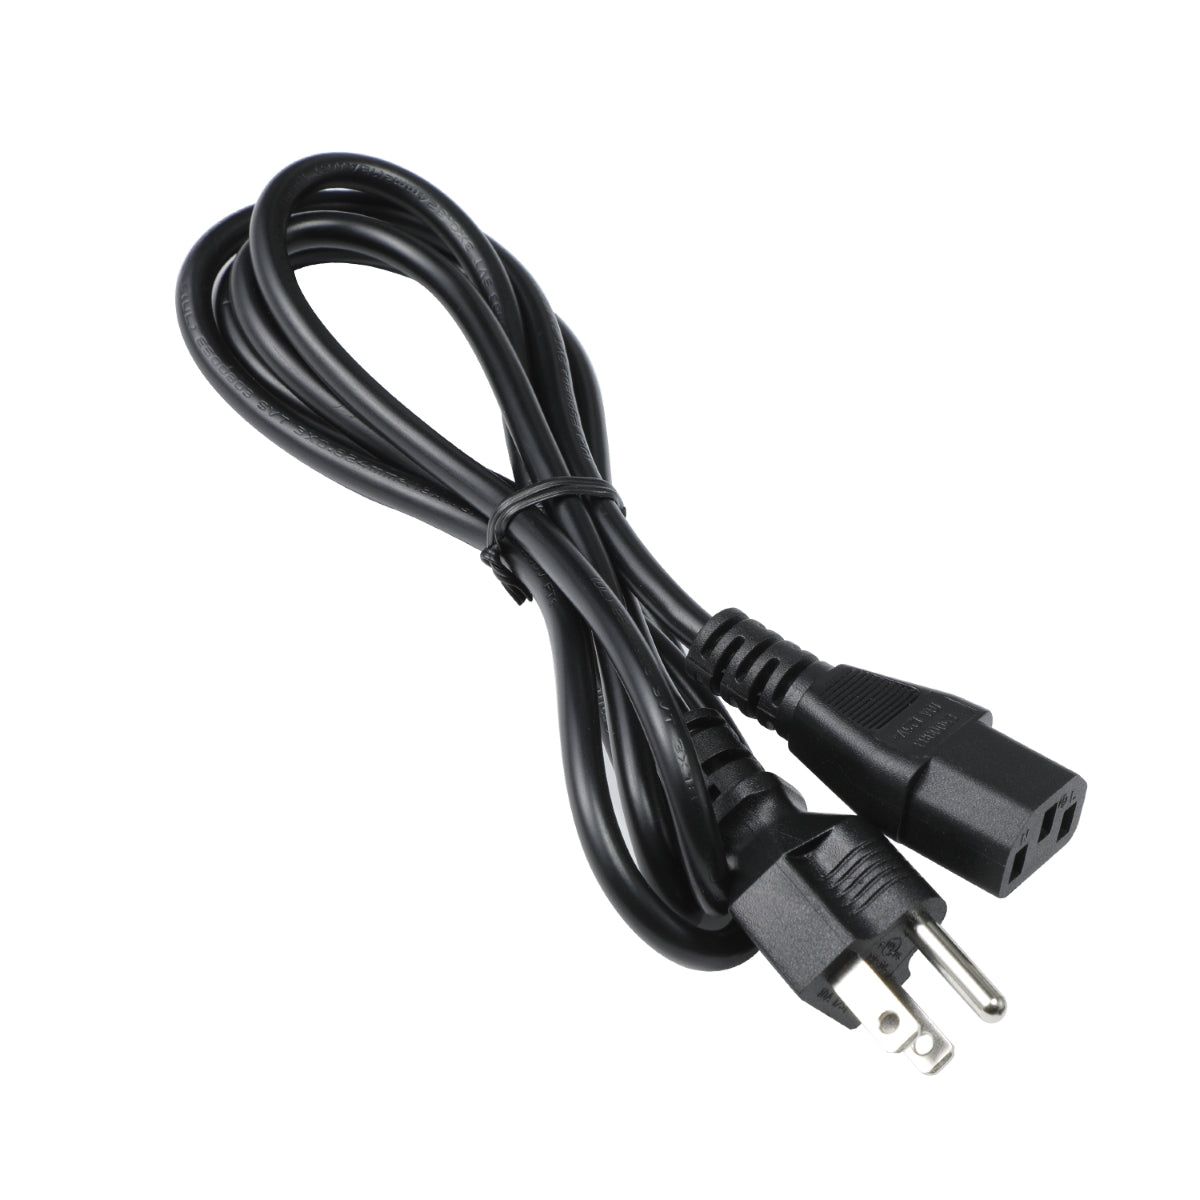 Power Cord for Samsung LS27A804NMNXGO Monitor TV.